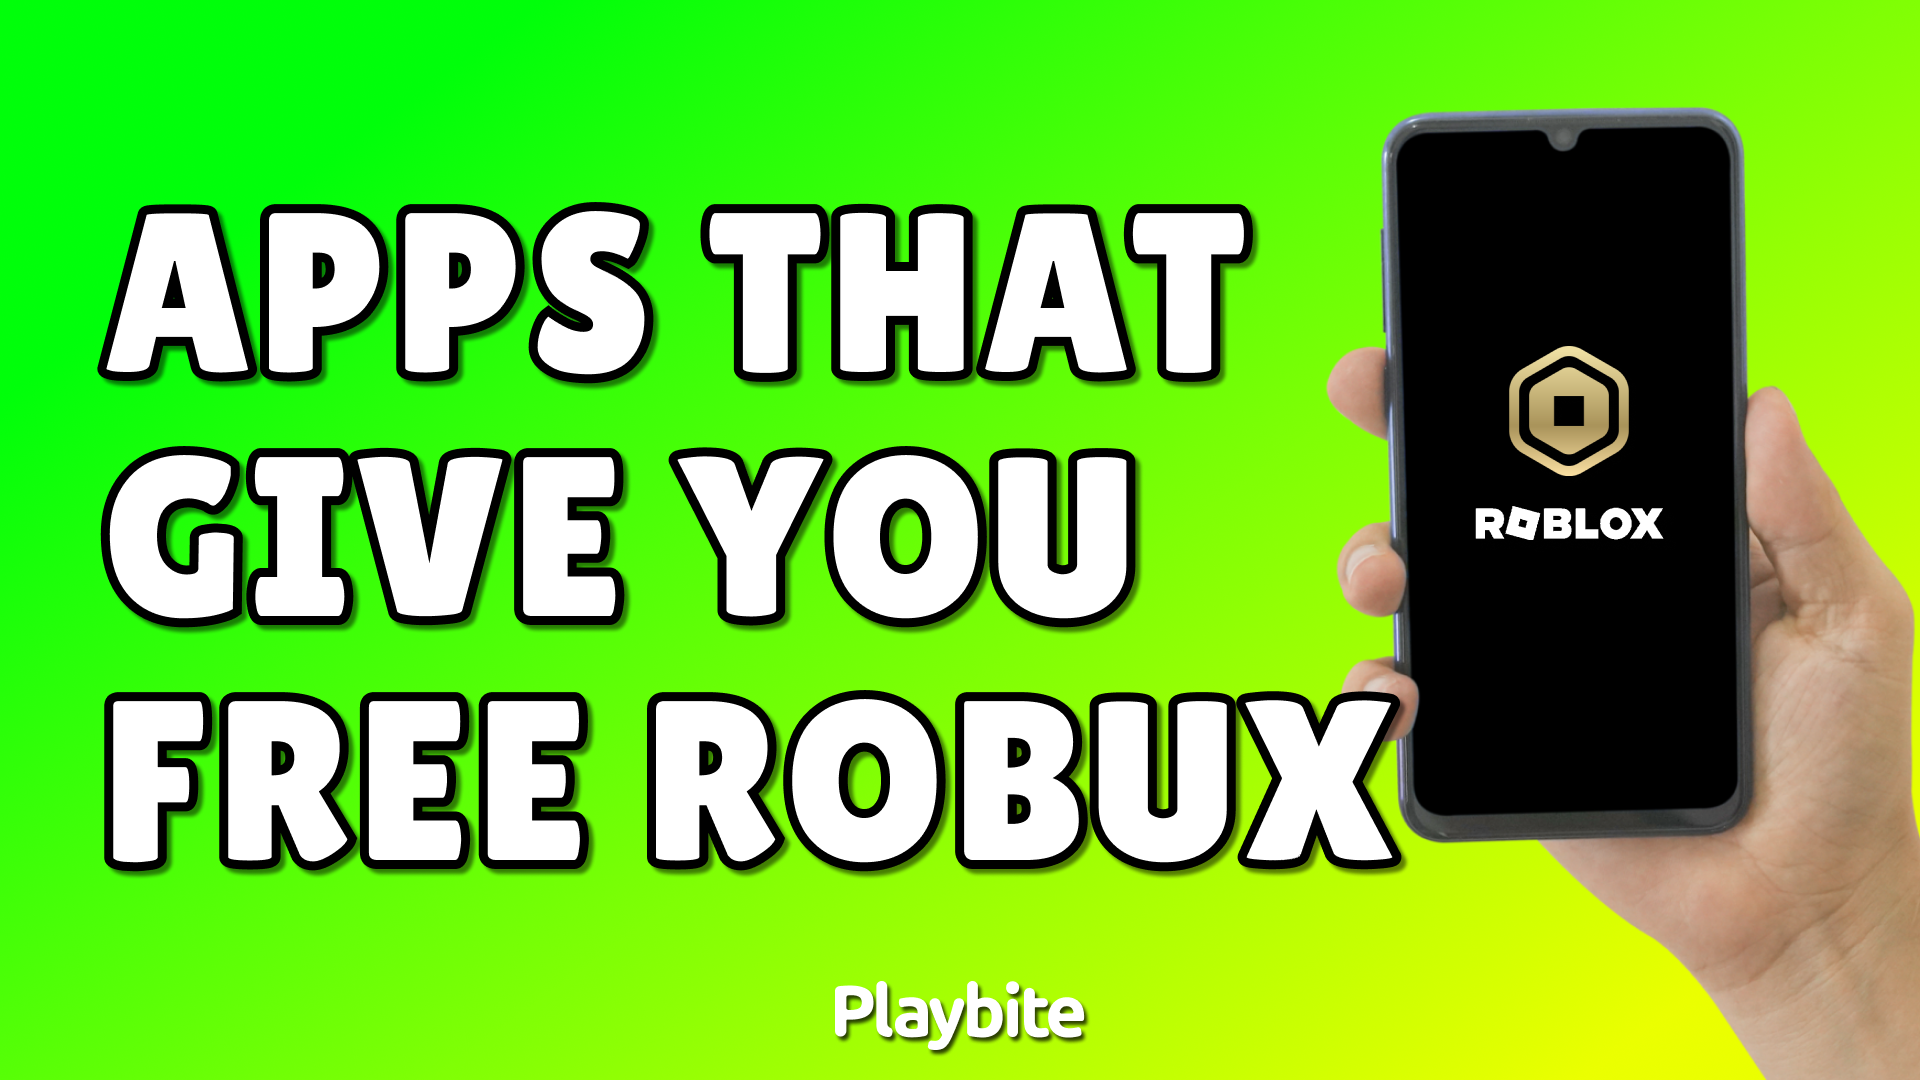 Can You Buy Robux With a Google Play Card? - Playbite